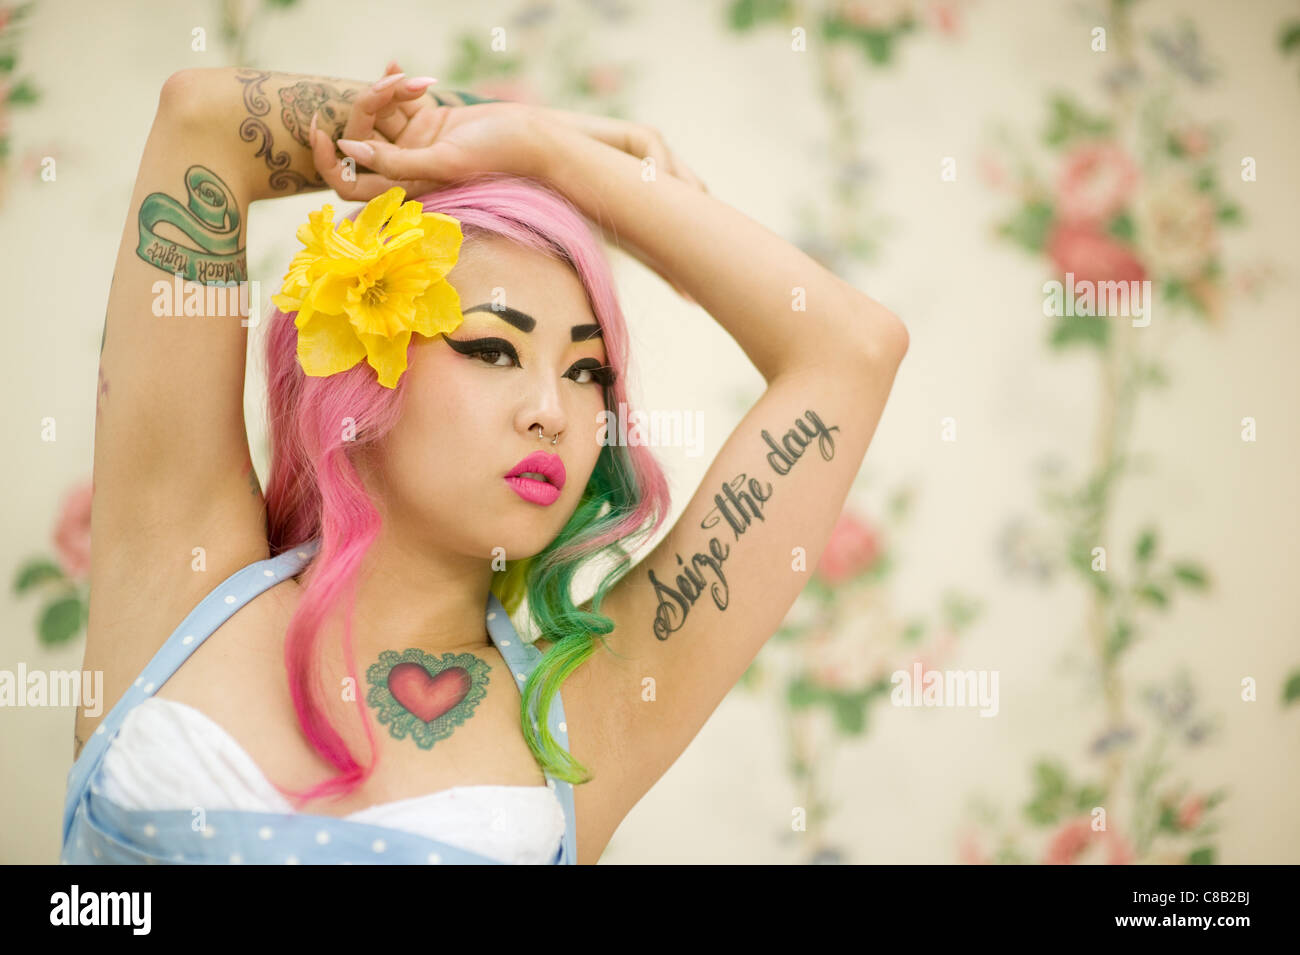 Close-up of young woman with flower in head and arms raised Stock Photo